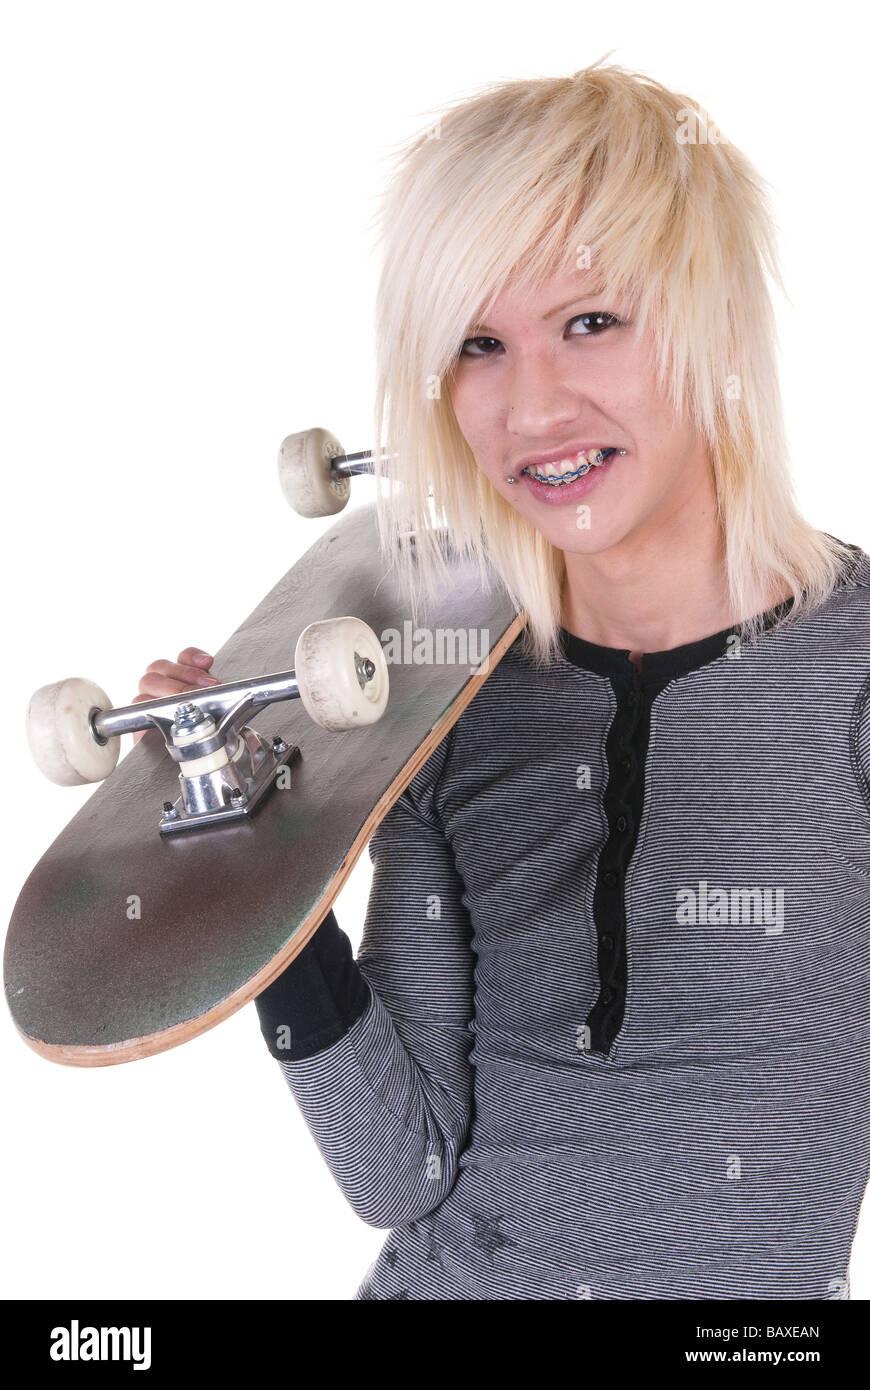 A blond teenage skateboarder with braces holding his skateboard Shows modern youth culture Stock Photo